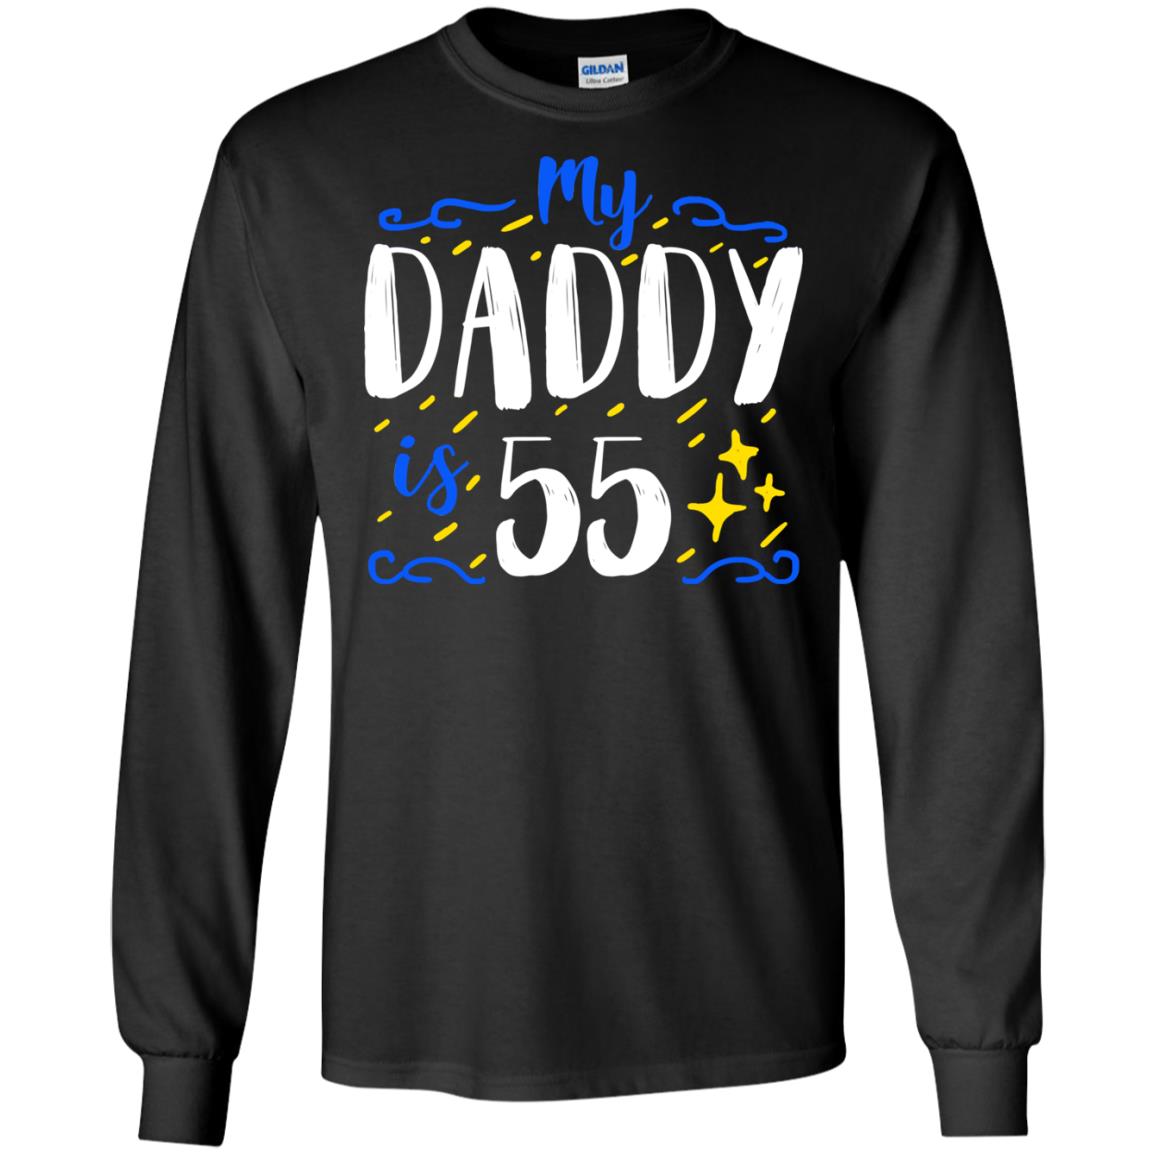 My Daddy Is 55 55th Birthday Daddy Shirt For Sons Or DaughtersG240 Gildan LS Ultra Cotton T-Shirt